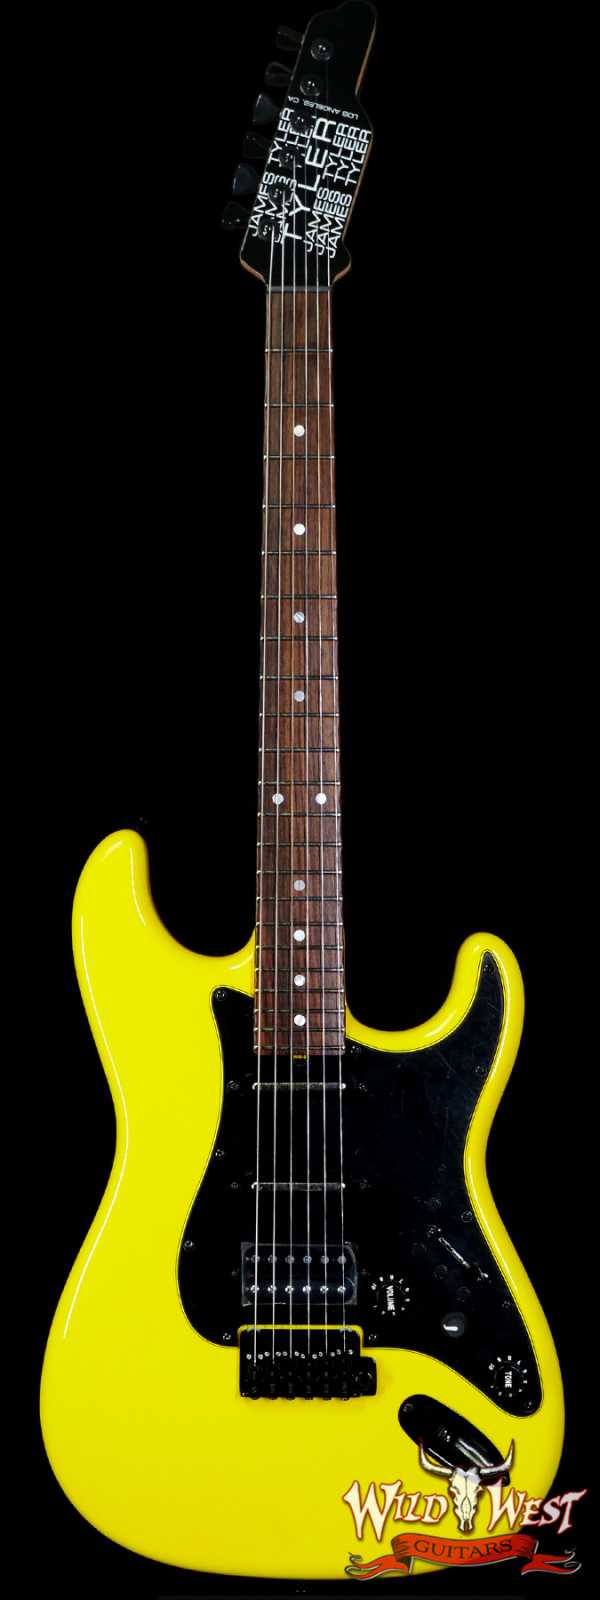 James Tyler USA L.A. Studio Classic Swamp Ash Hollow Body Rosewood Fingerboard Midboost Preamp Fly Yellow